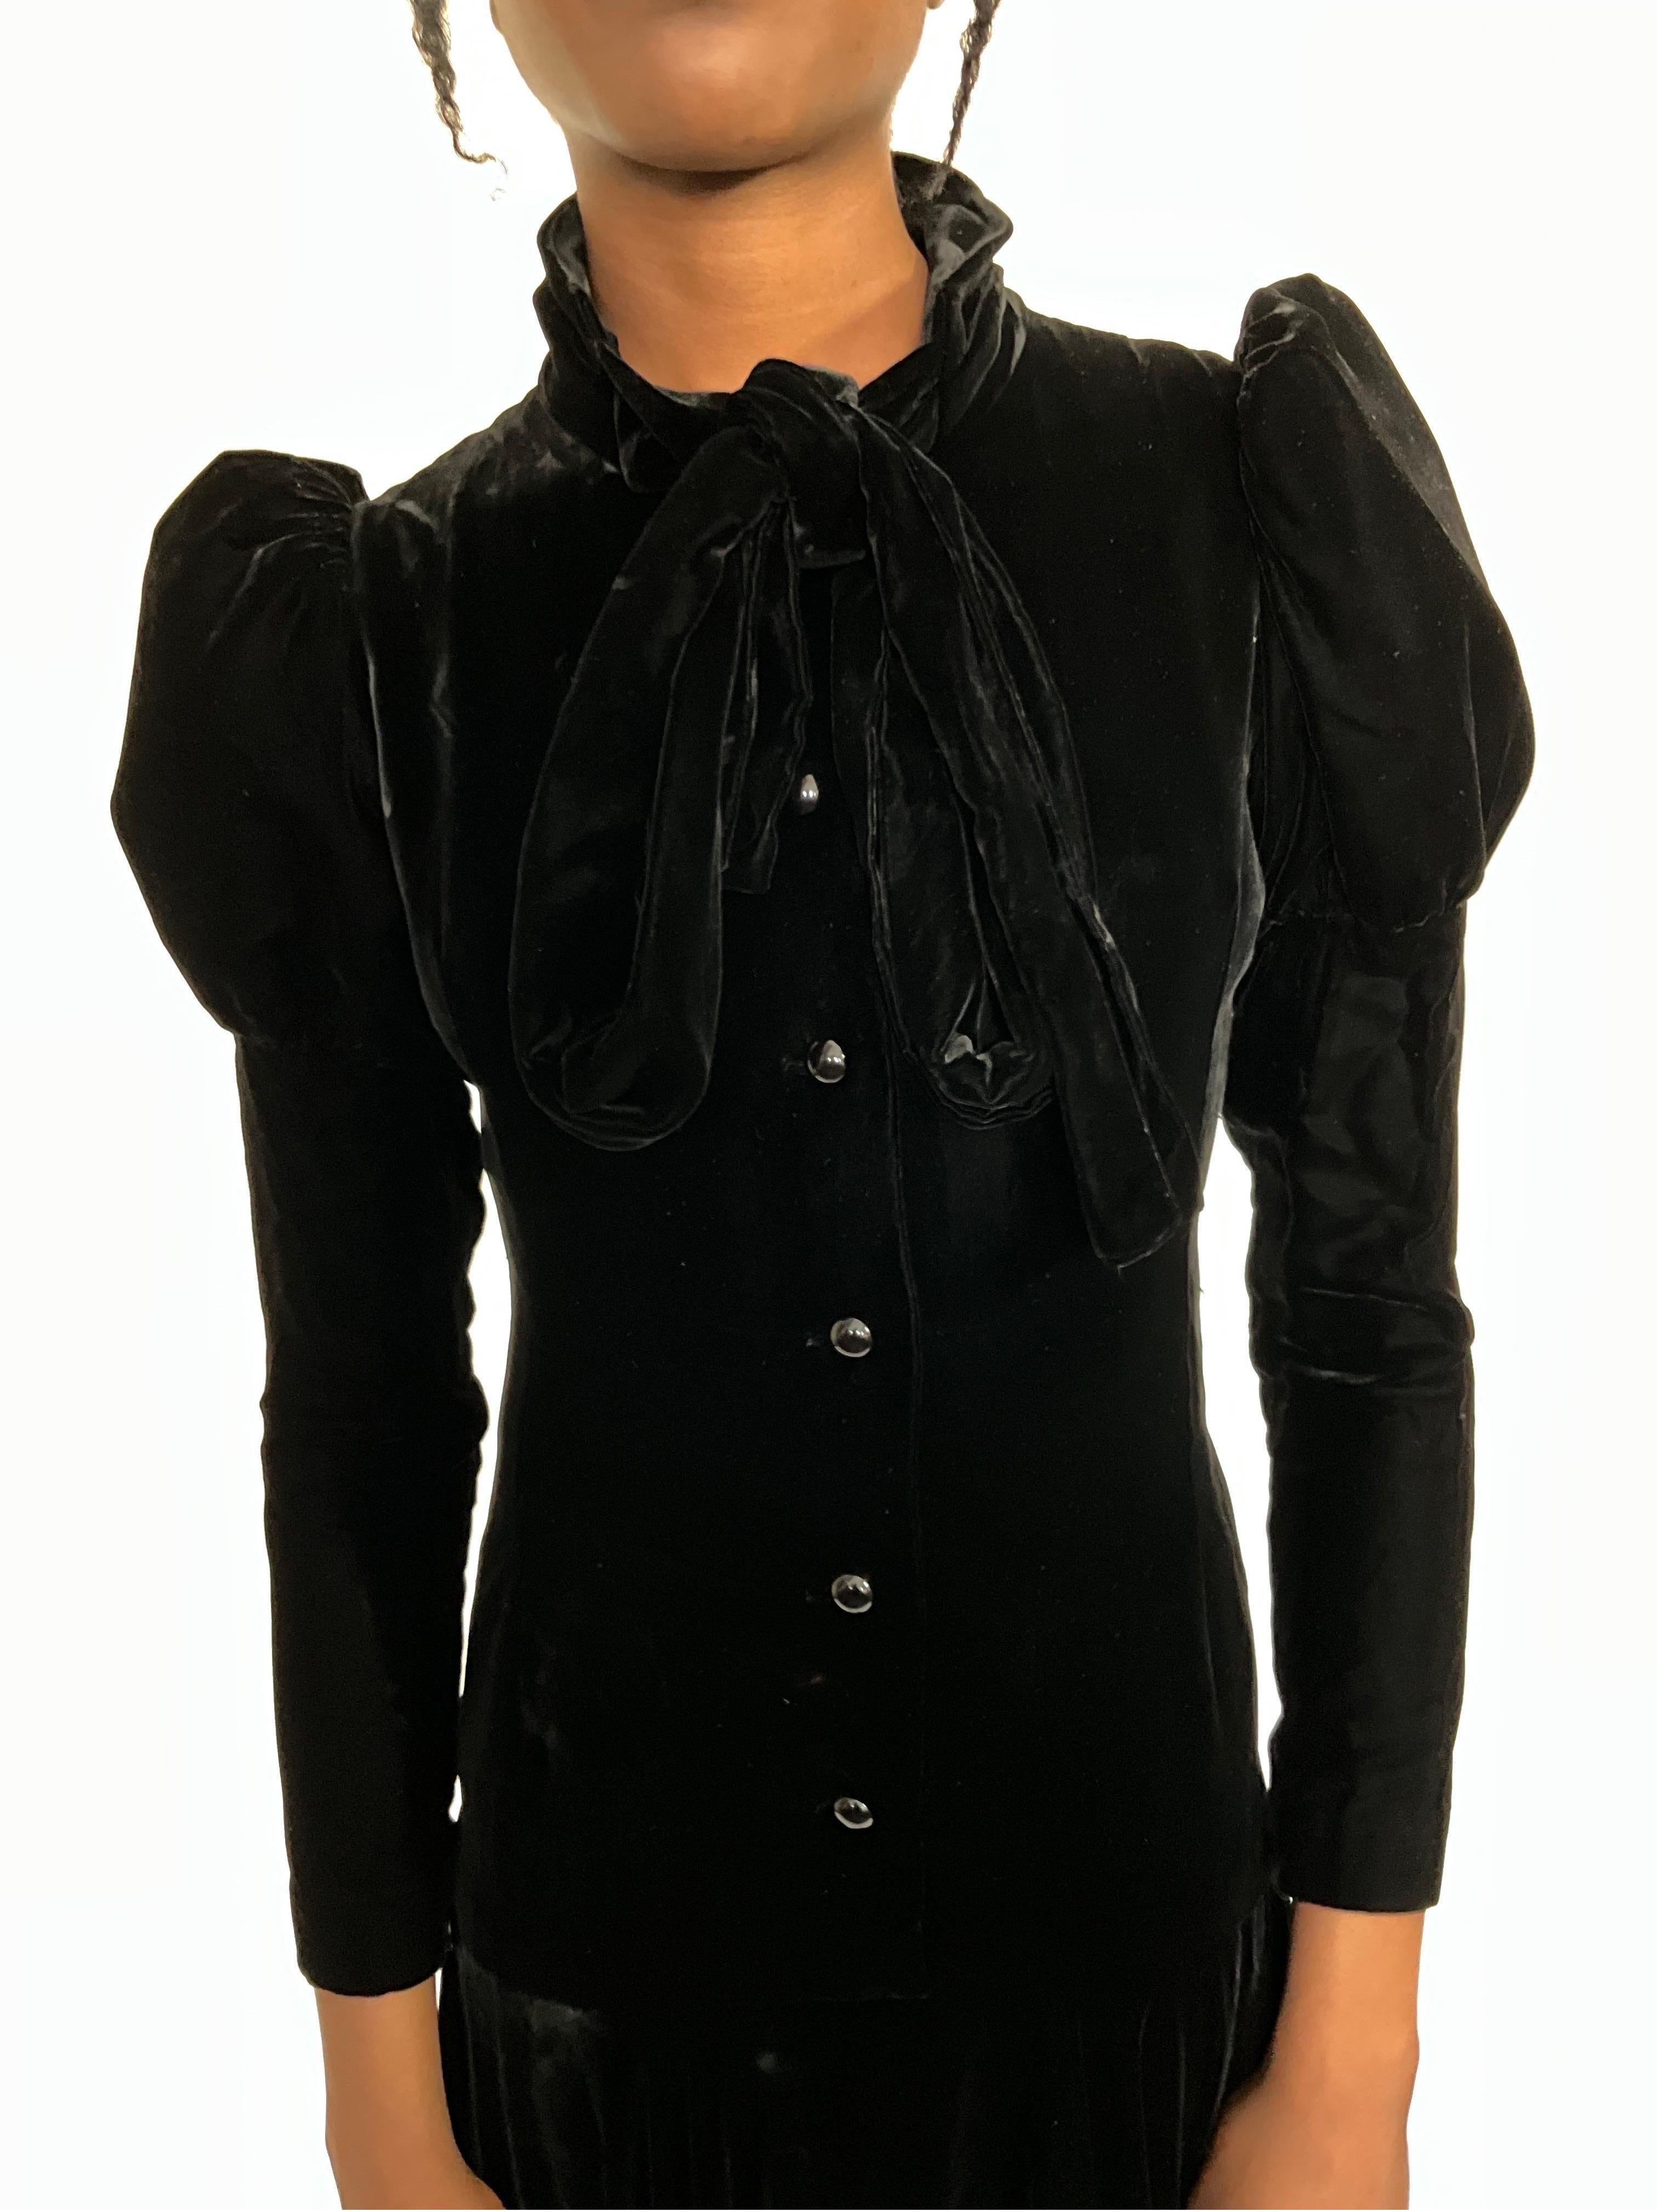 Christian Dior Paris numbered couture black silk evening gown. C. 1960s 7